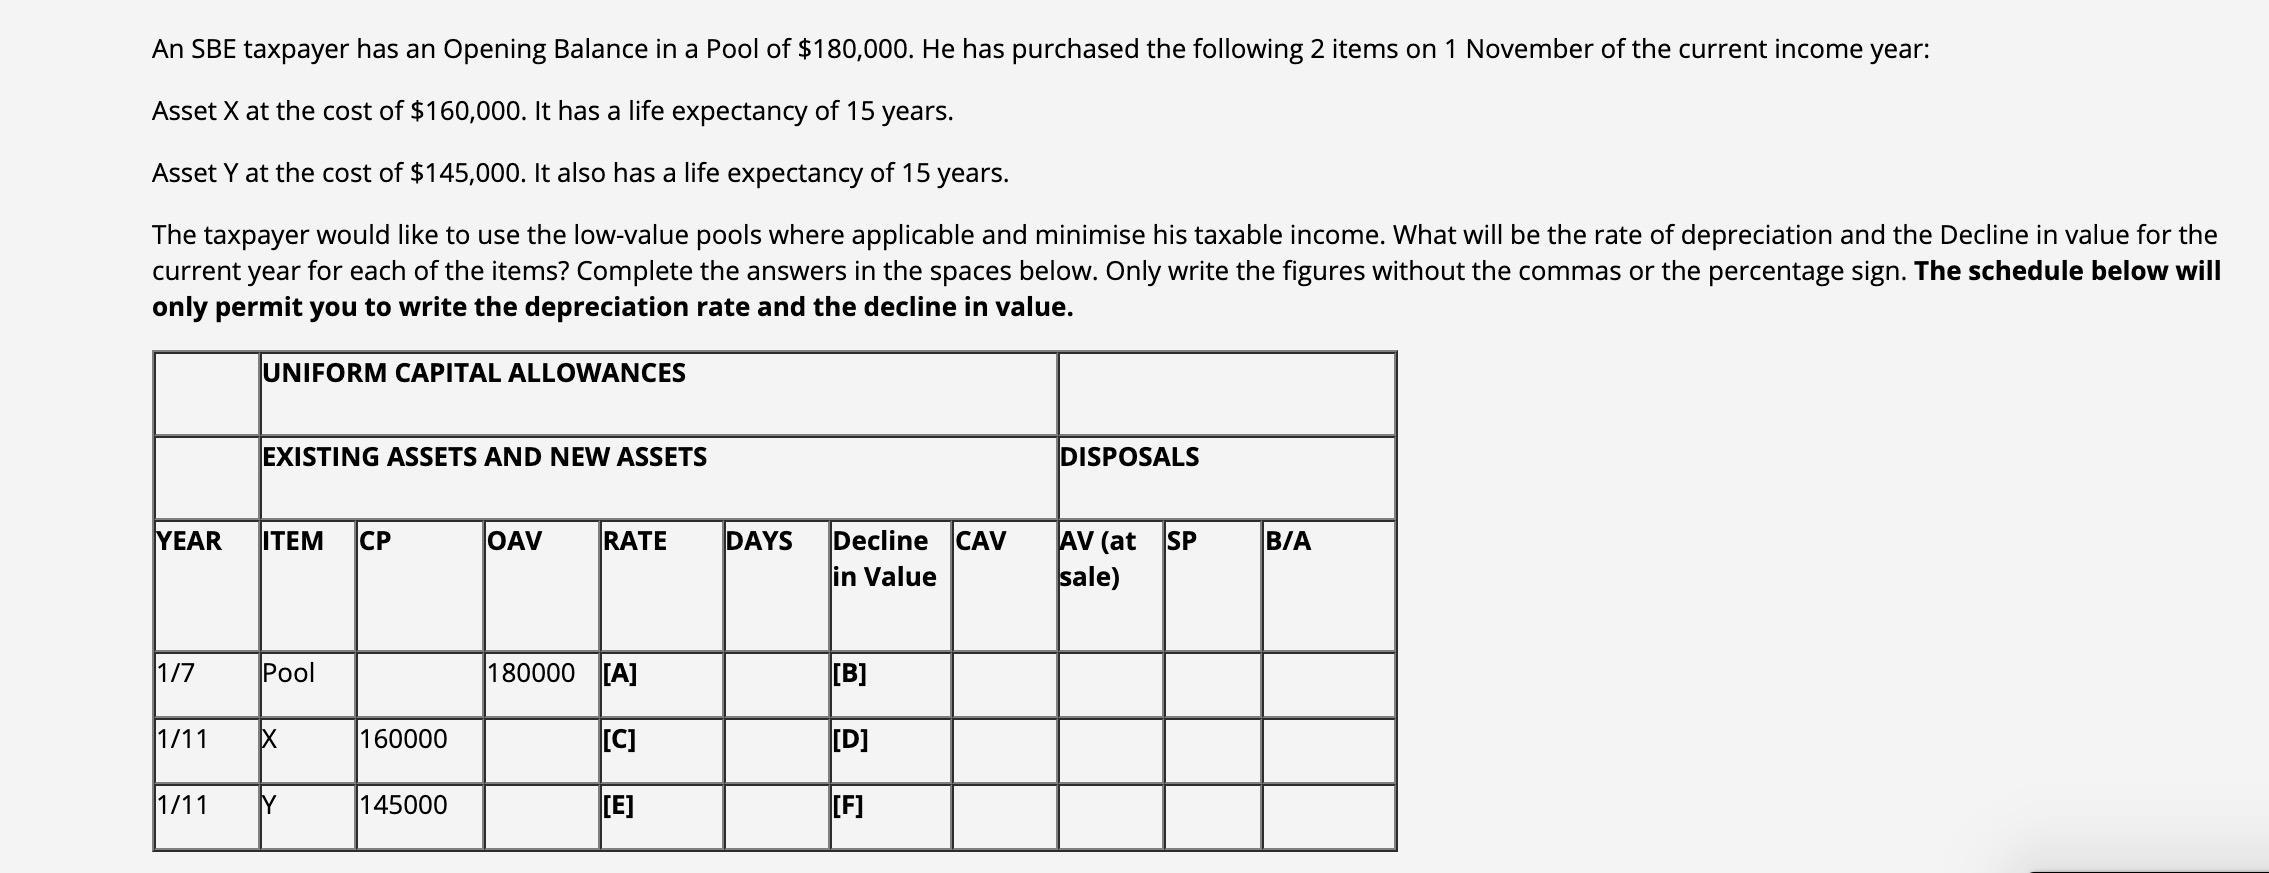 An SBE taxpayer has an Opening Balance in a Pool of $180,000. He has purchased the following 2 items on 1 November of the cur